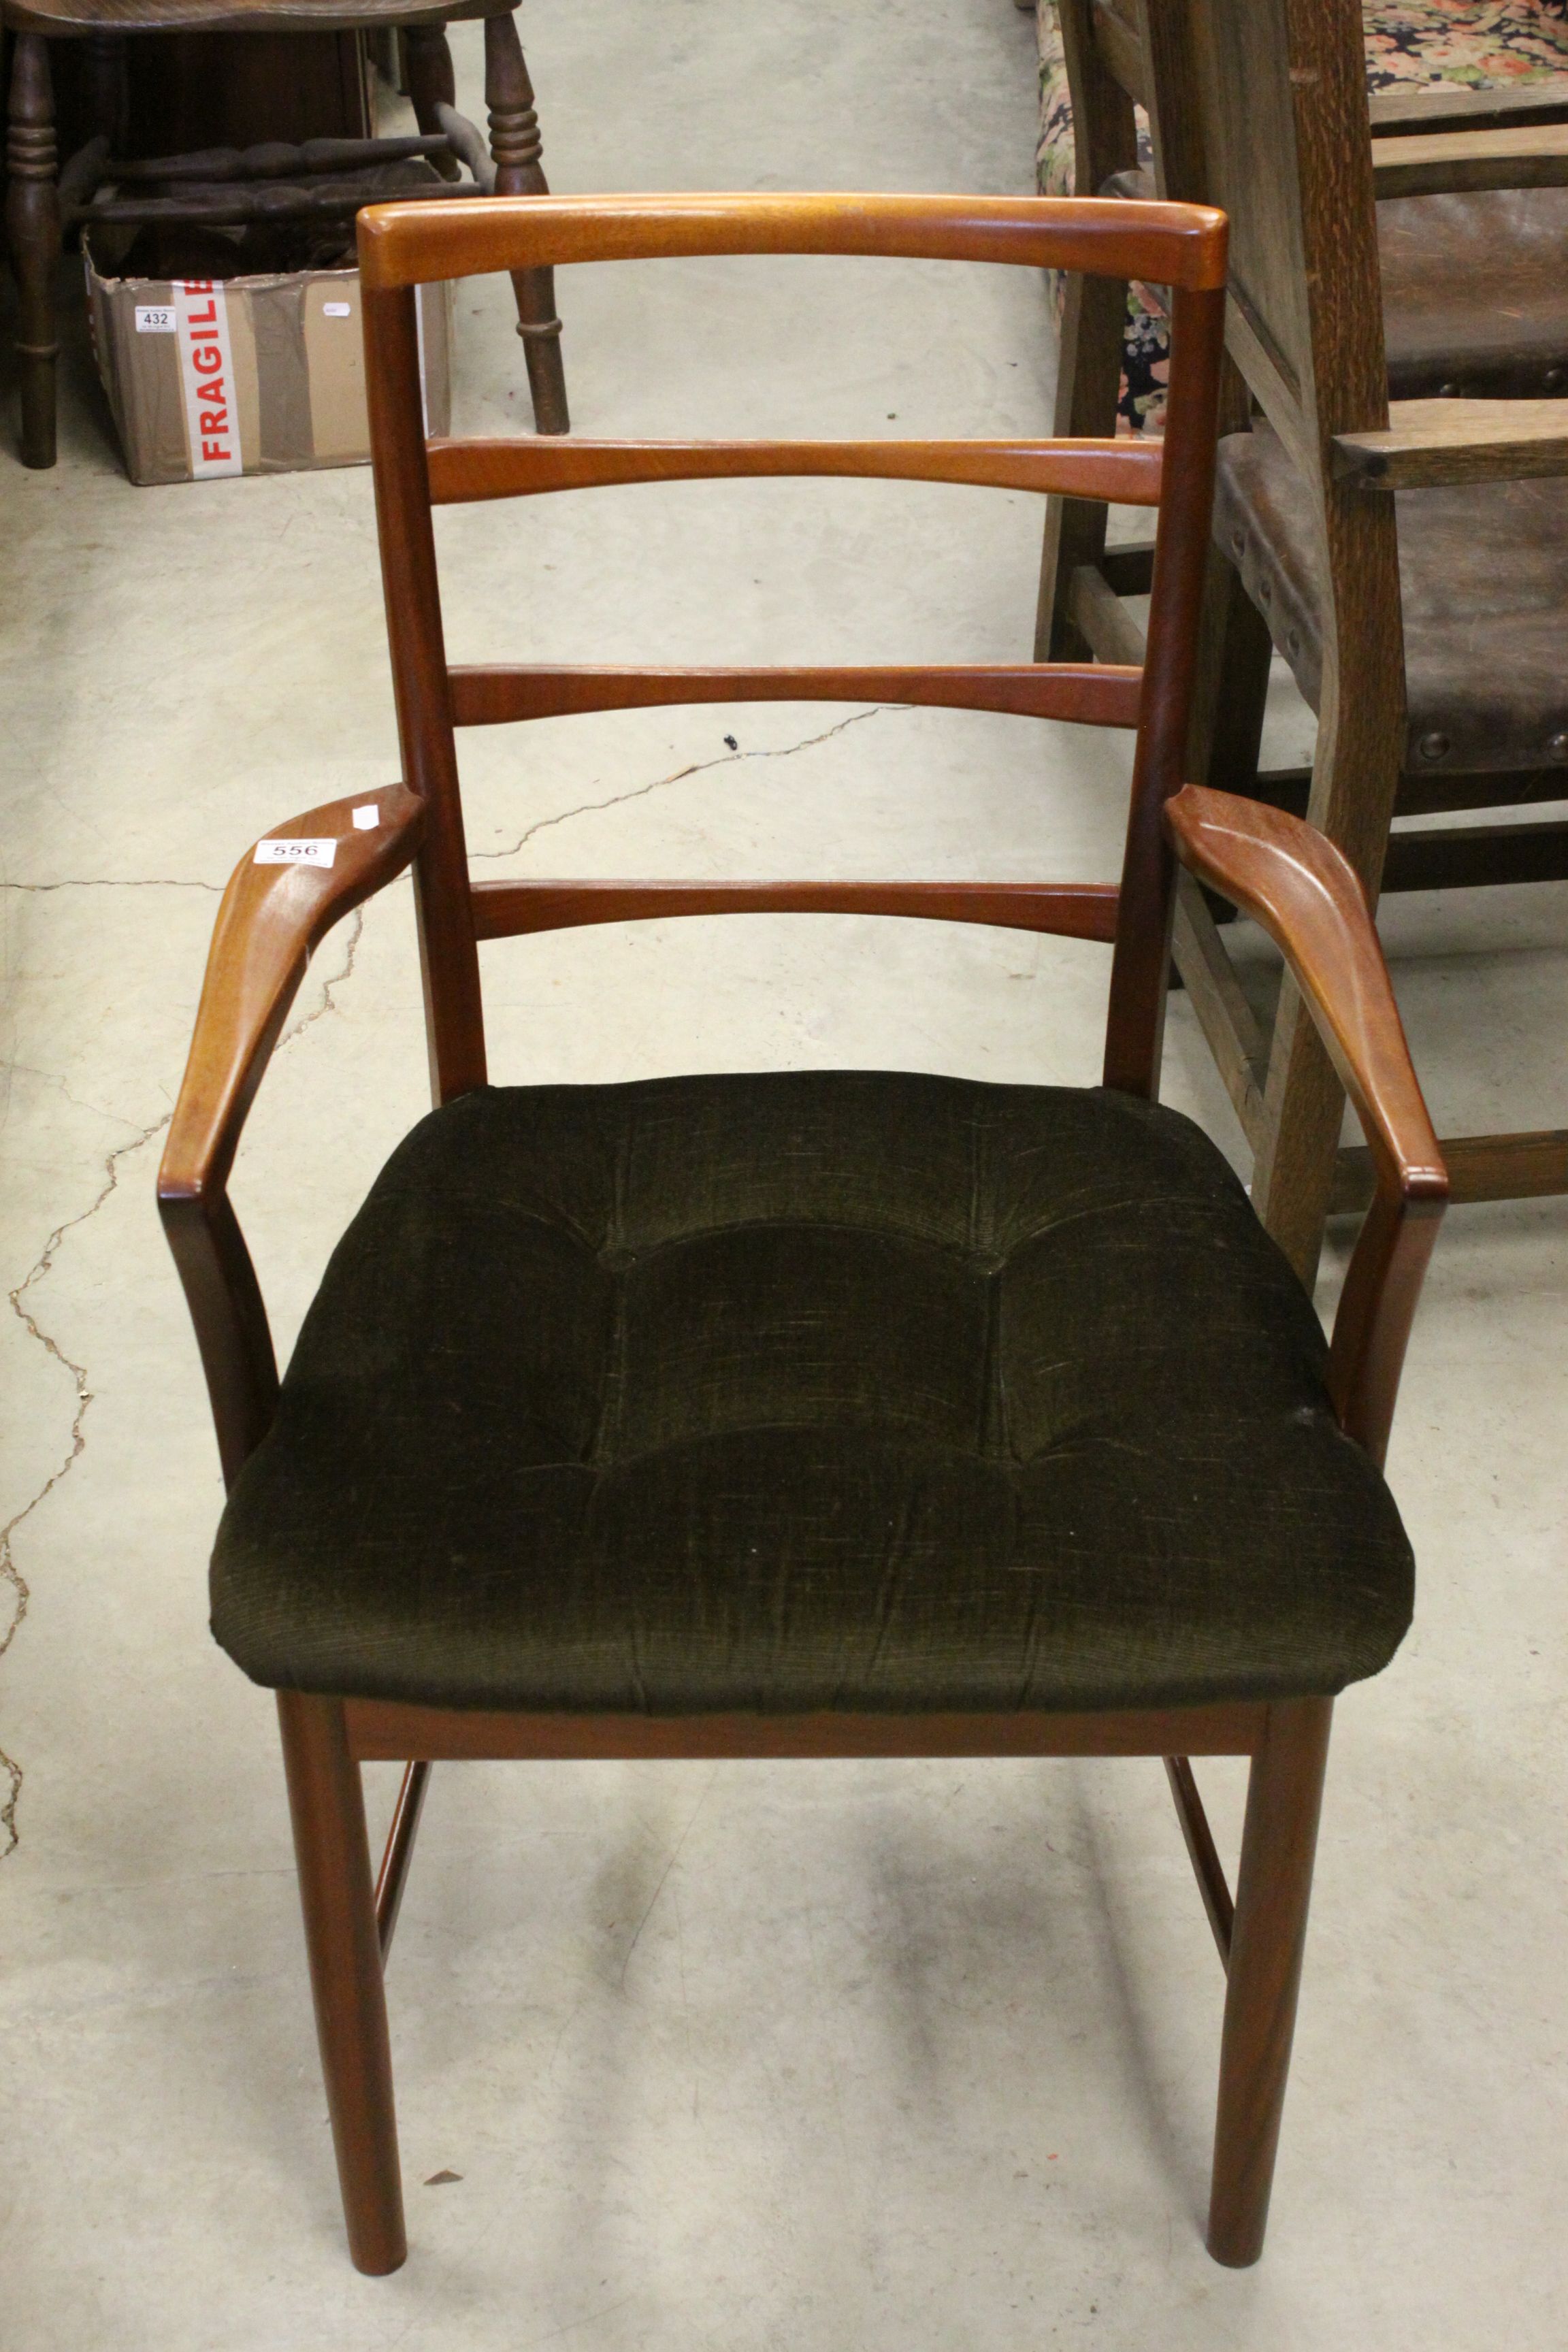 Retro Danish Style Teak Elbow Chair with Padded Seat - Image 2 of 7